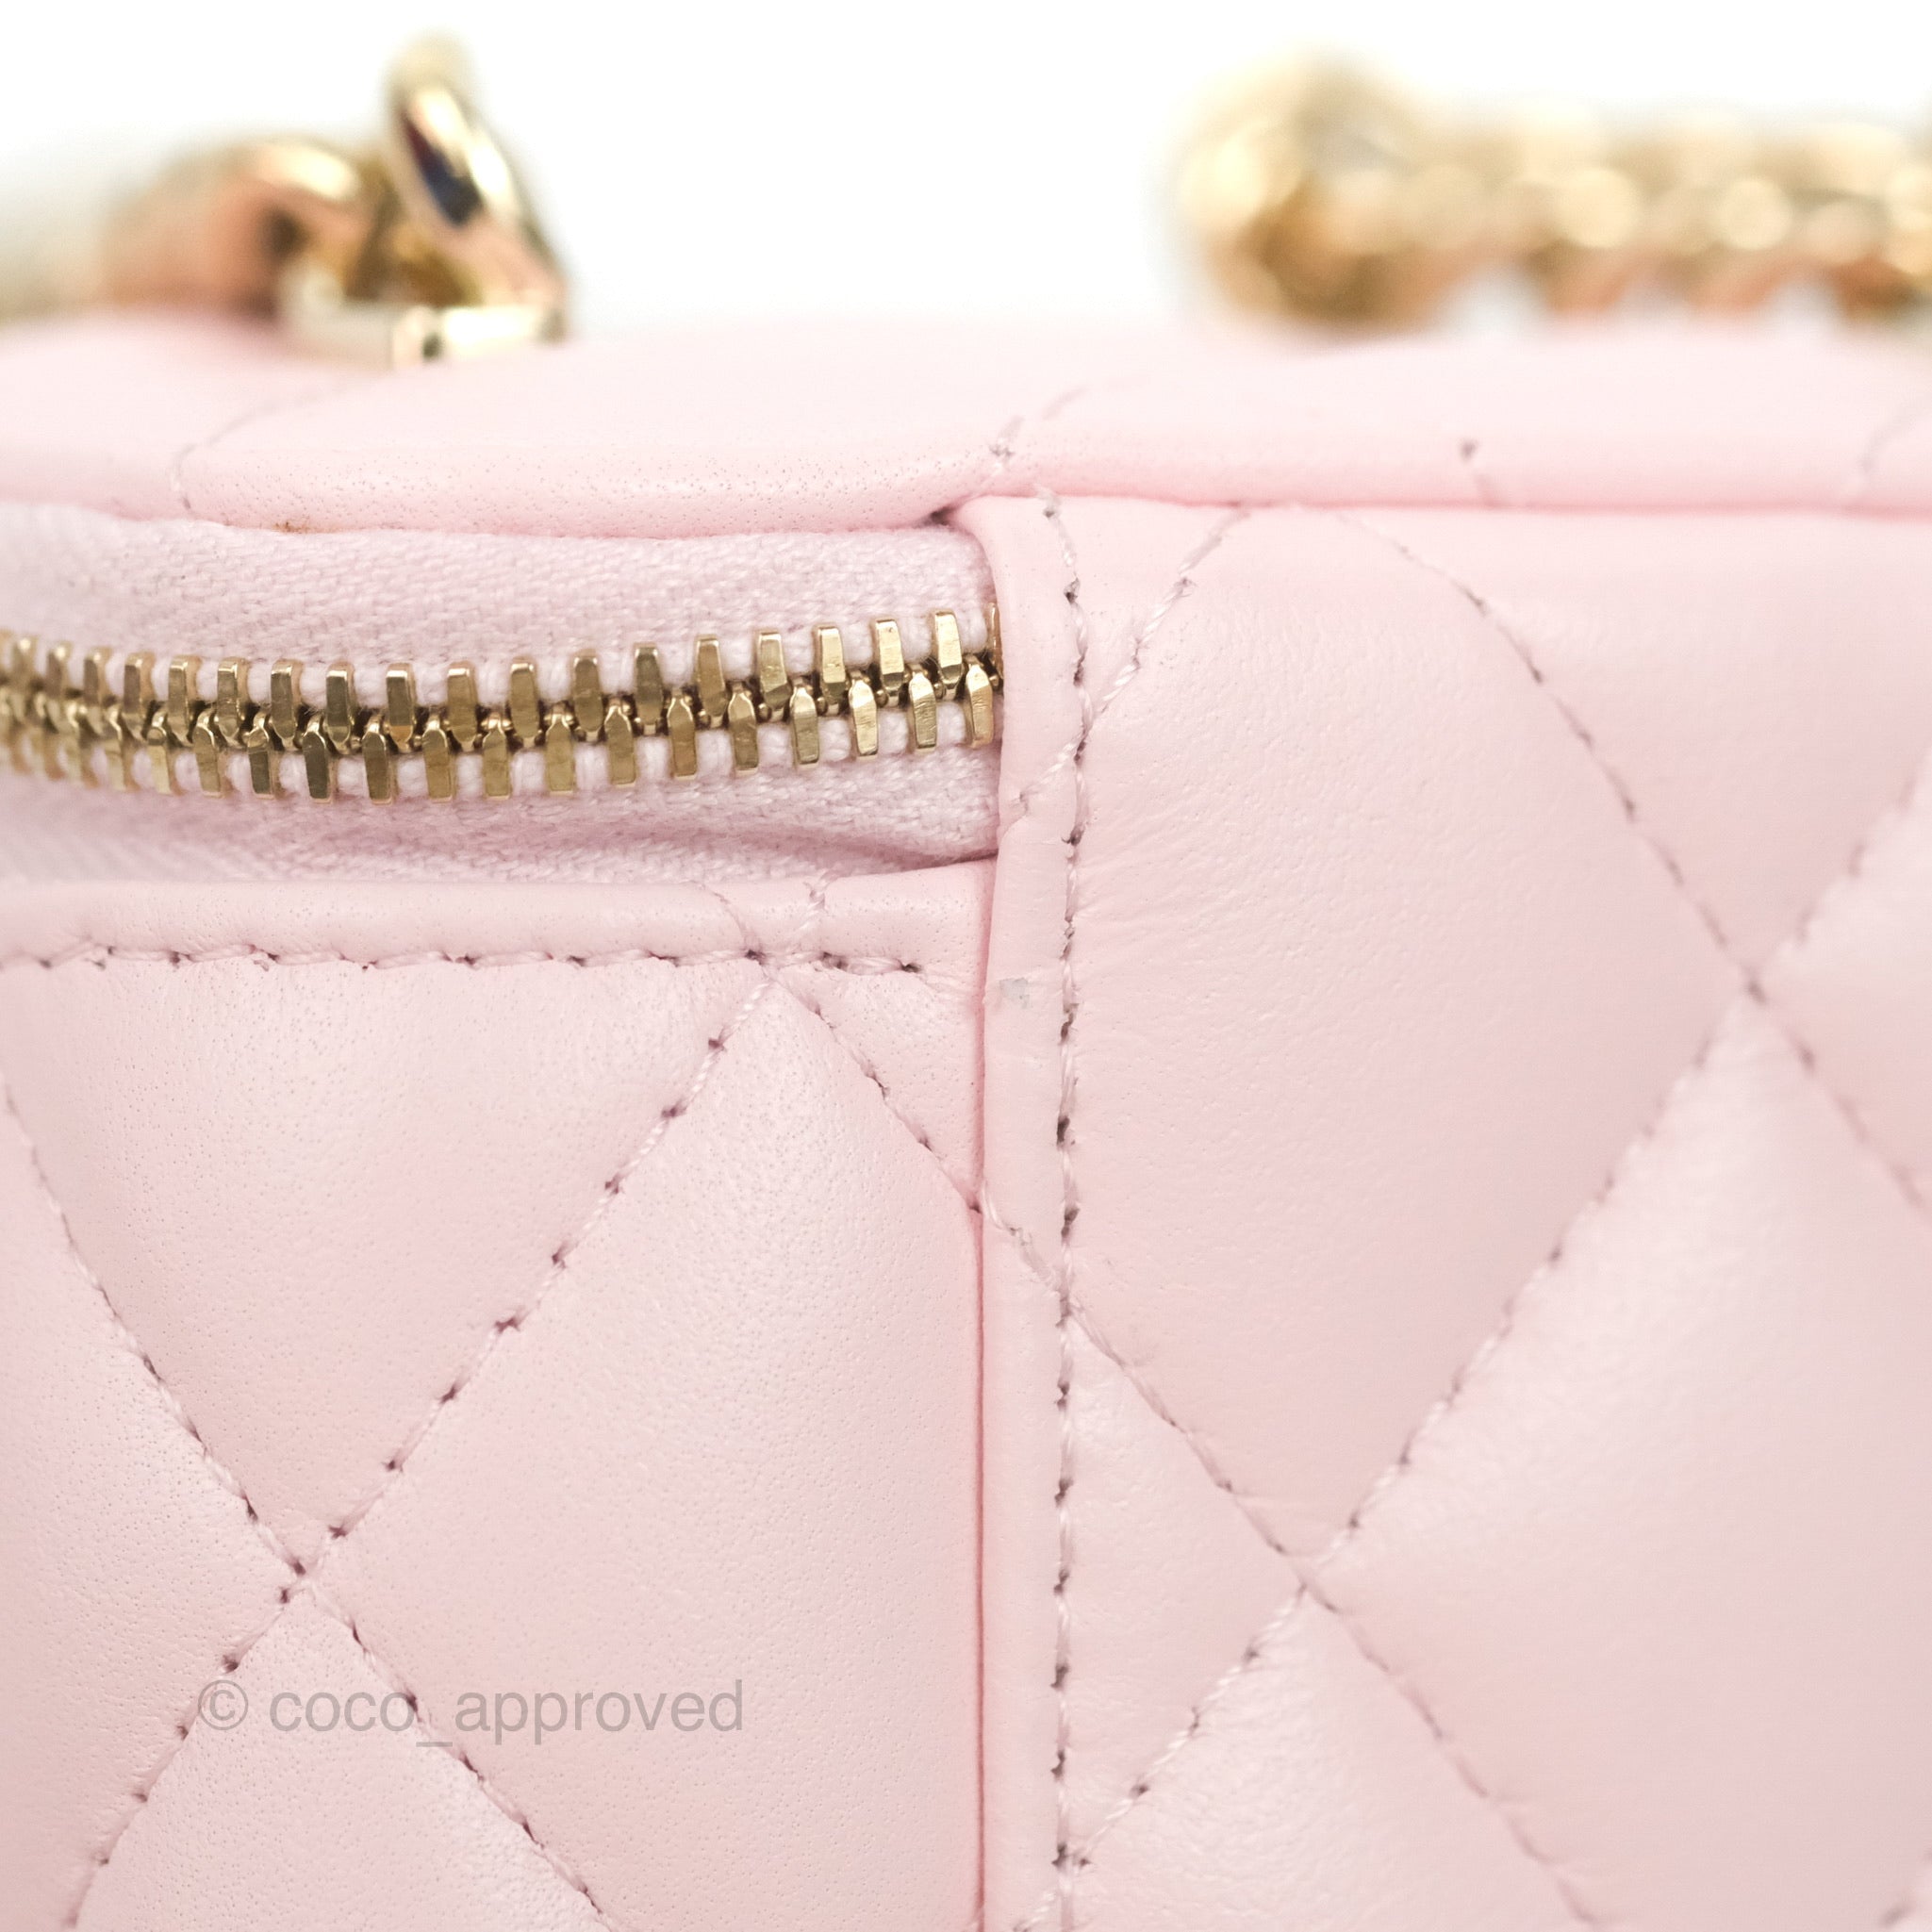 Chanel Quilted Heart Crush Mini Vanity With Chain Pink Caviar Aged Gol –  Coco Approved Studio